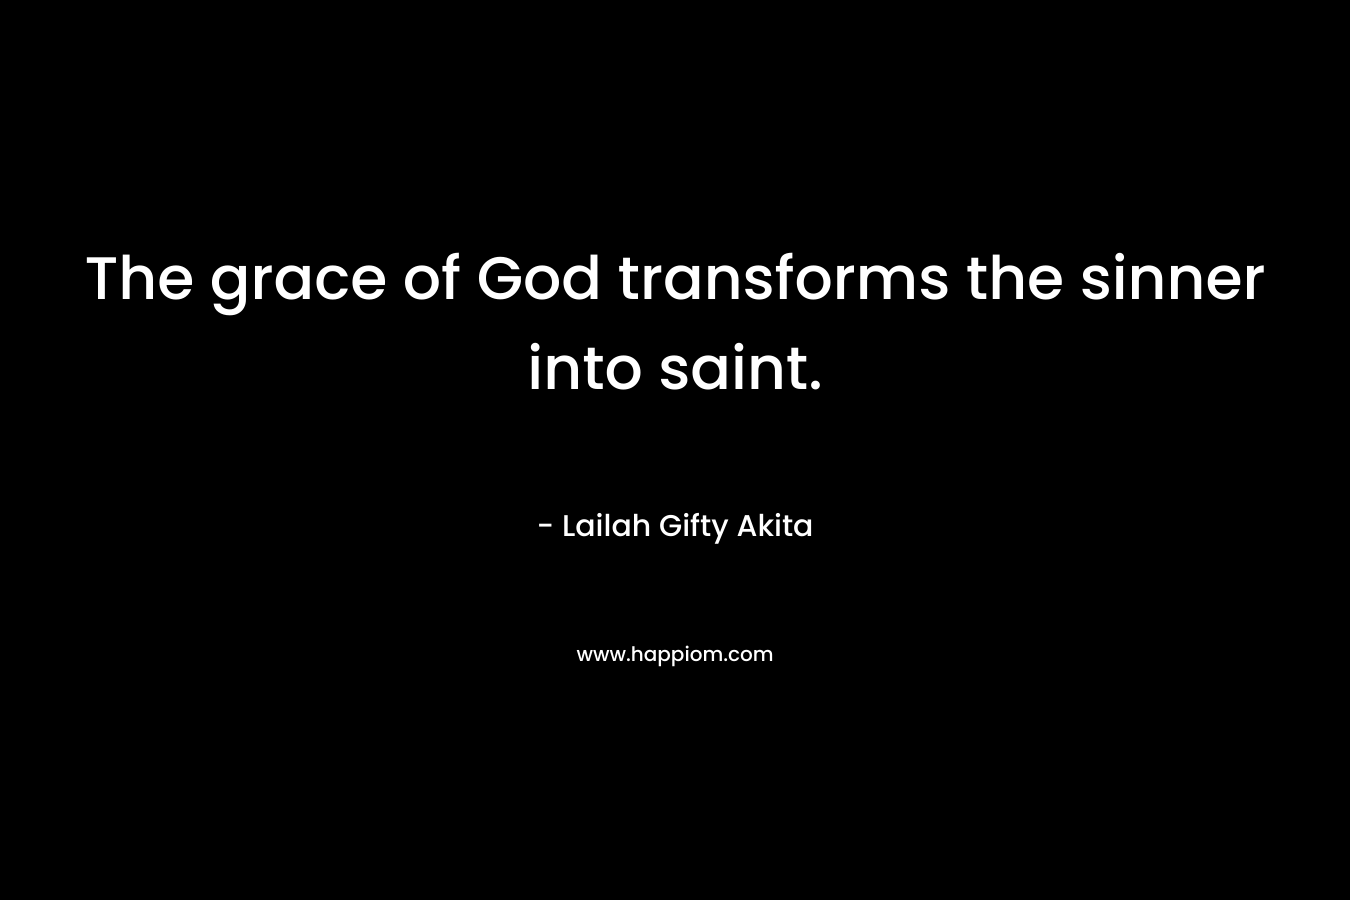 The grace of God transforms the sinner into saint. – Lailah Gifty Akita